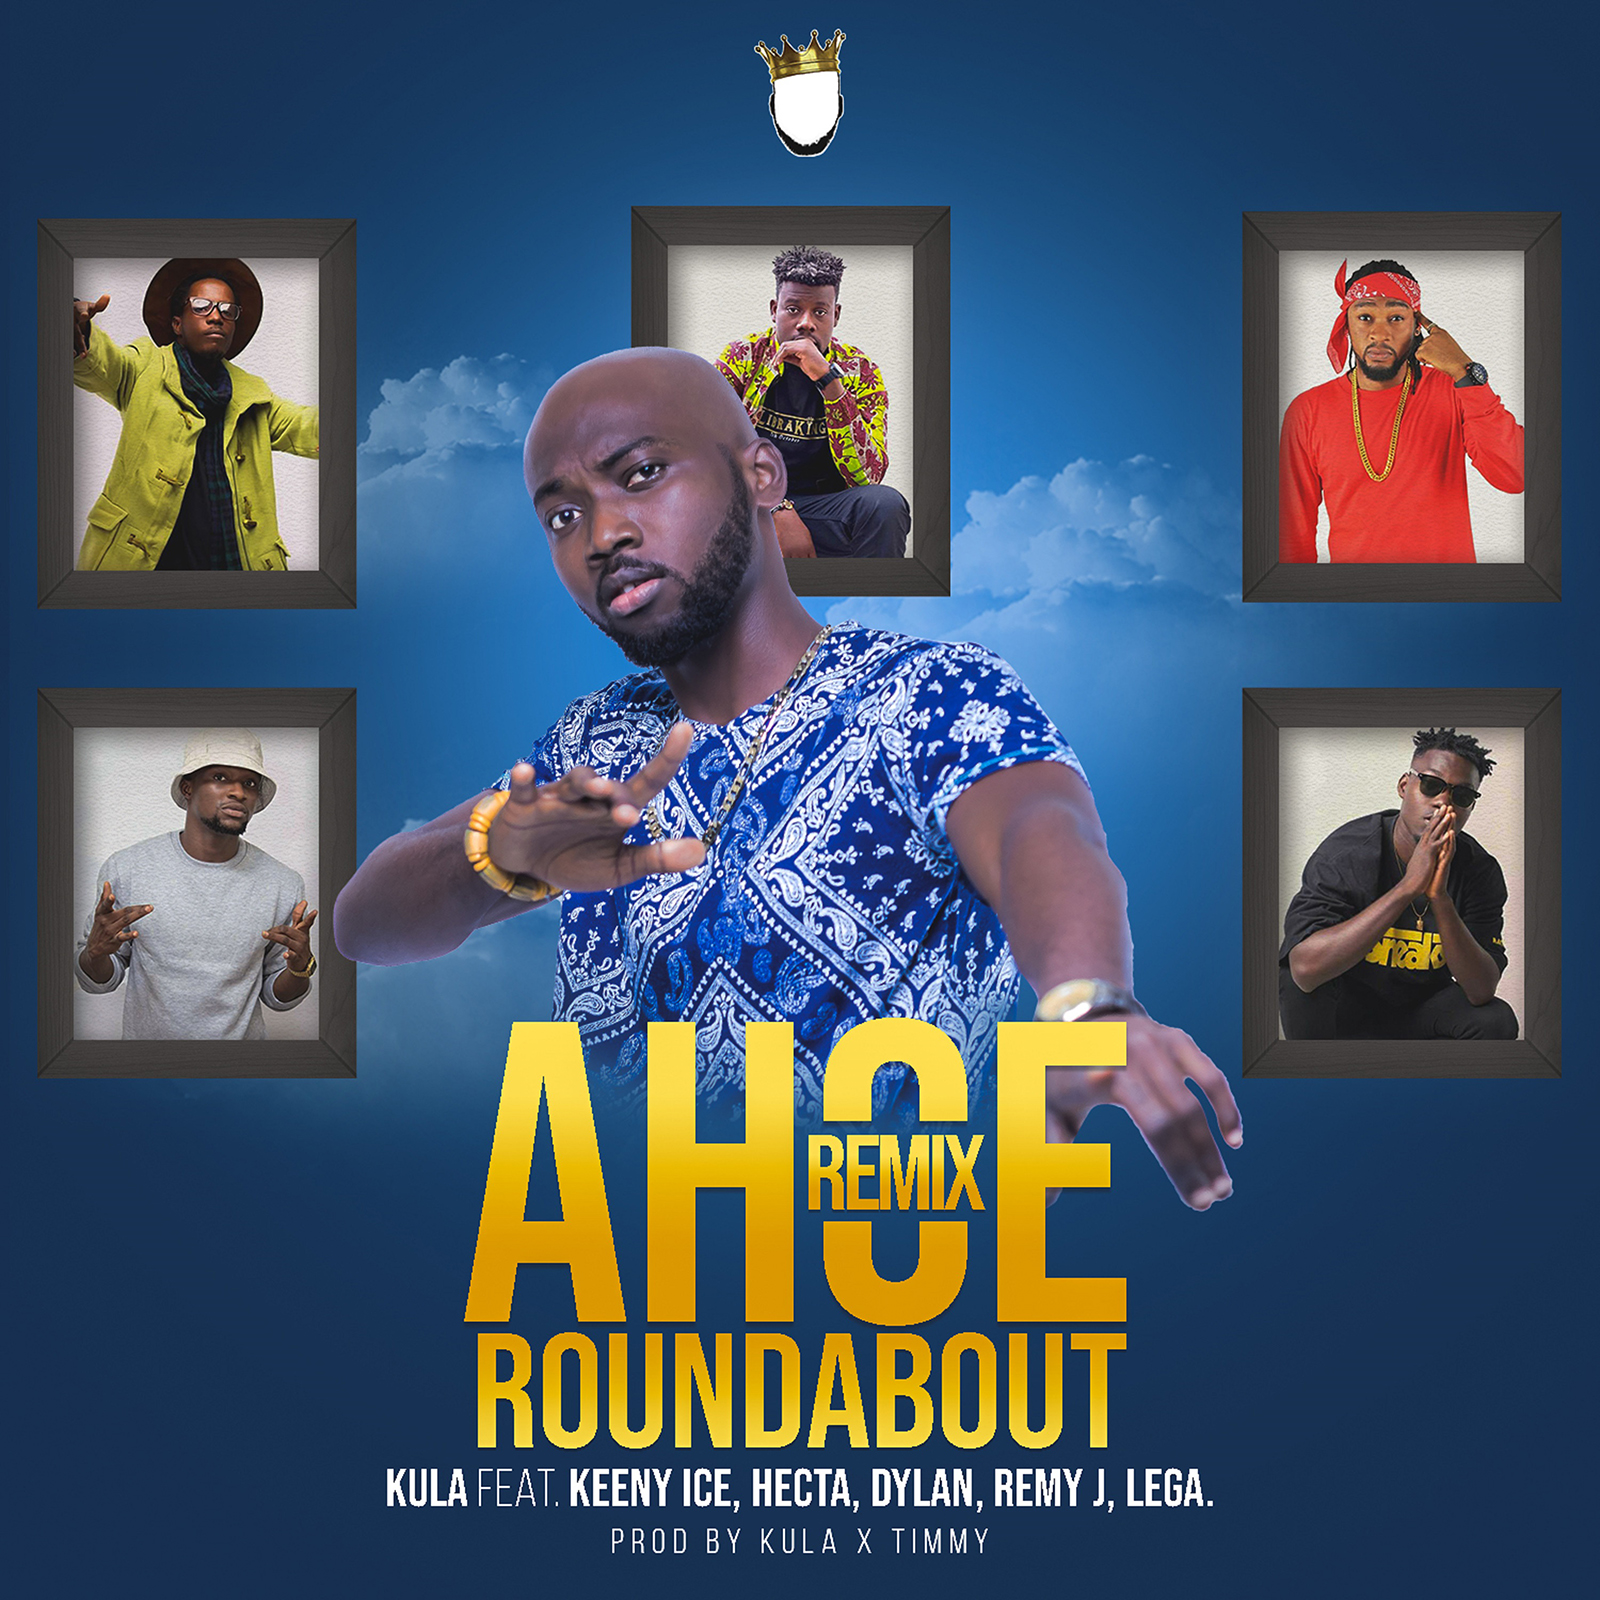 Ahoe Roundabout Remix by Kula feat. Keeny Ice, Hecta, Dylan, Remy J & Lega